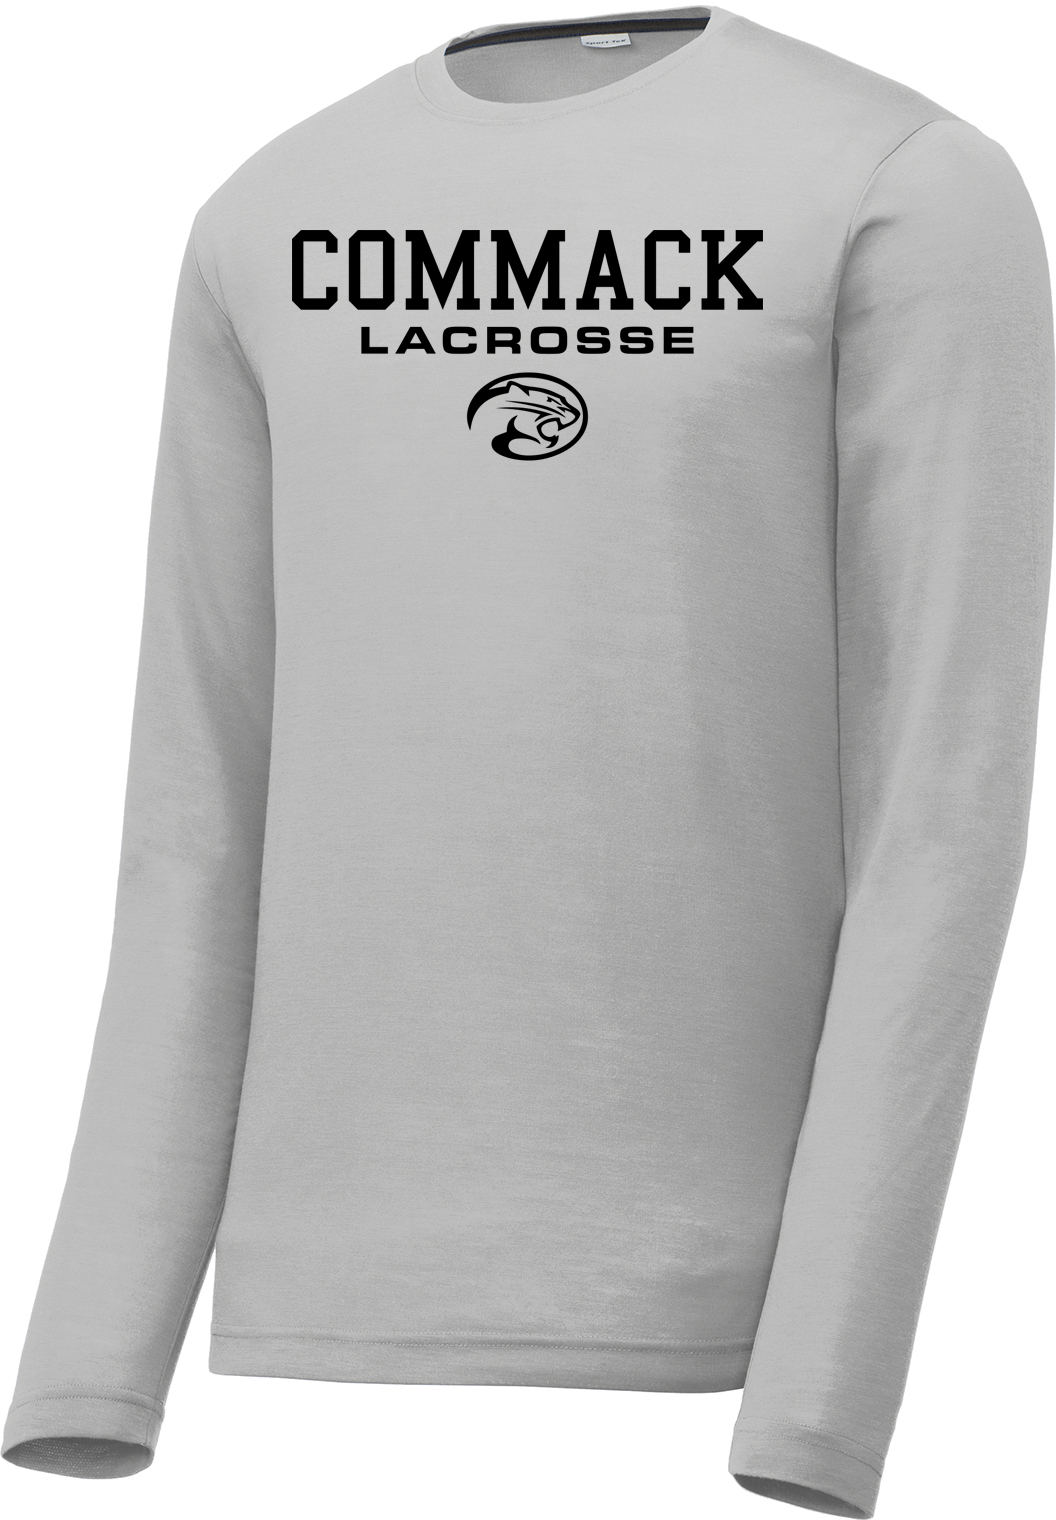 Commack Youth Lacrosse Men's Silver Long Sleeve CottonTouch Performance Shirt